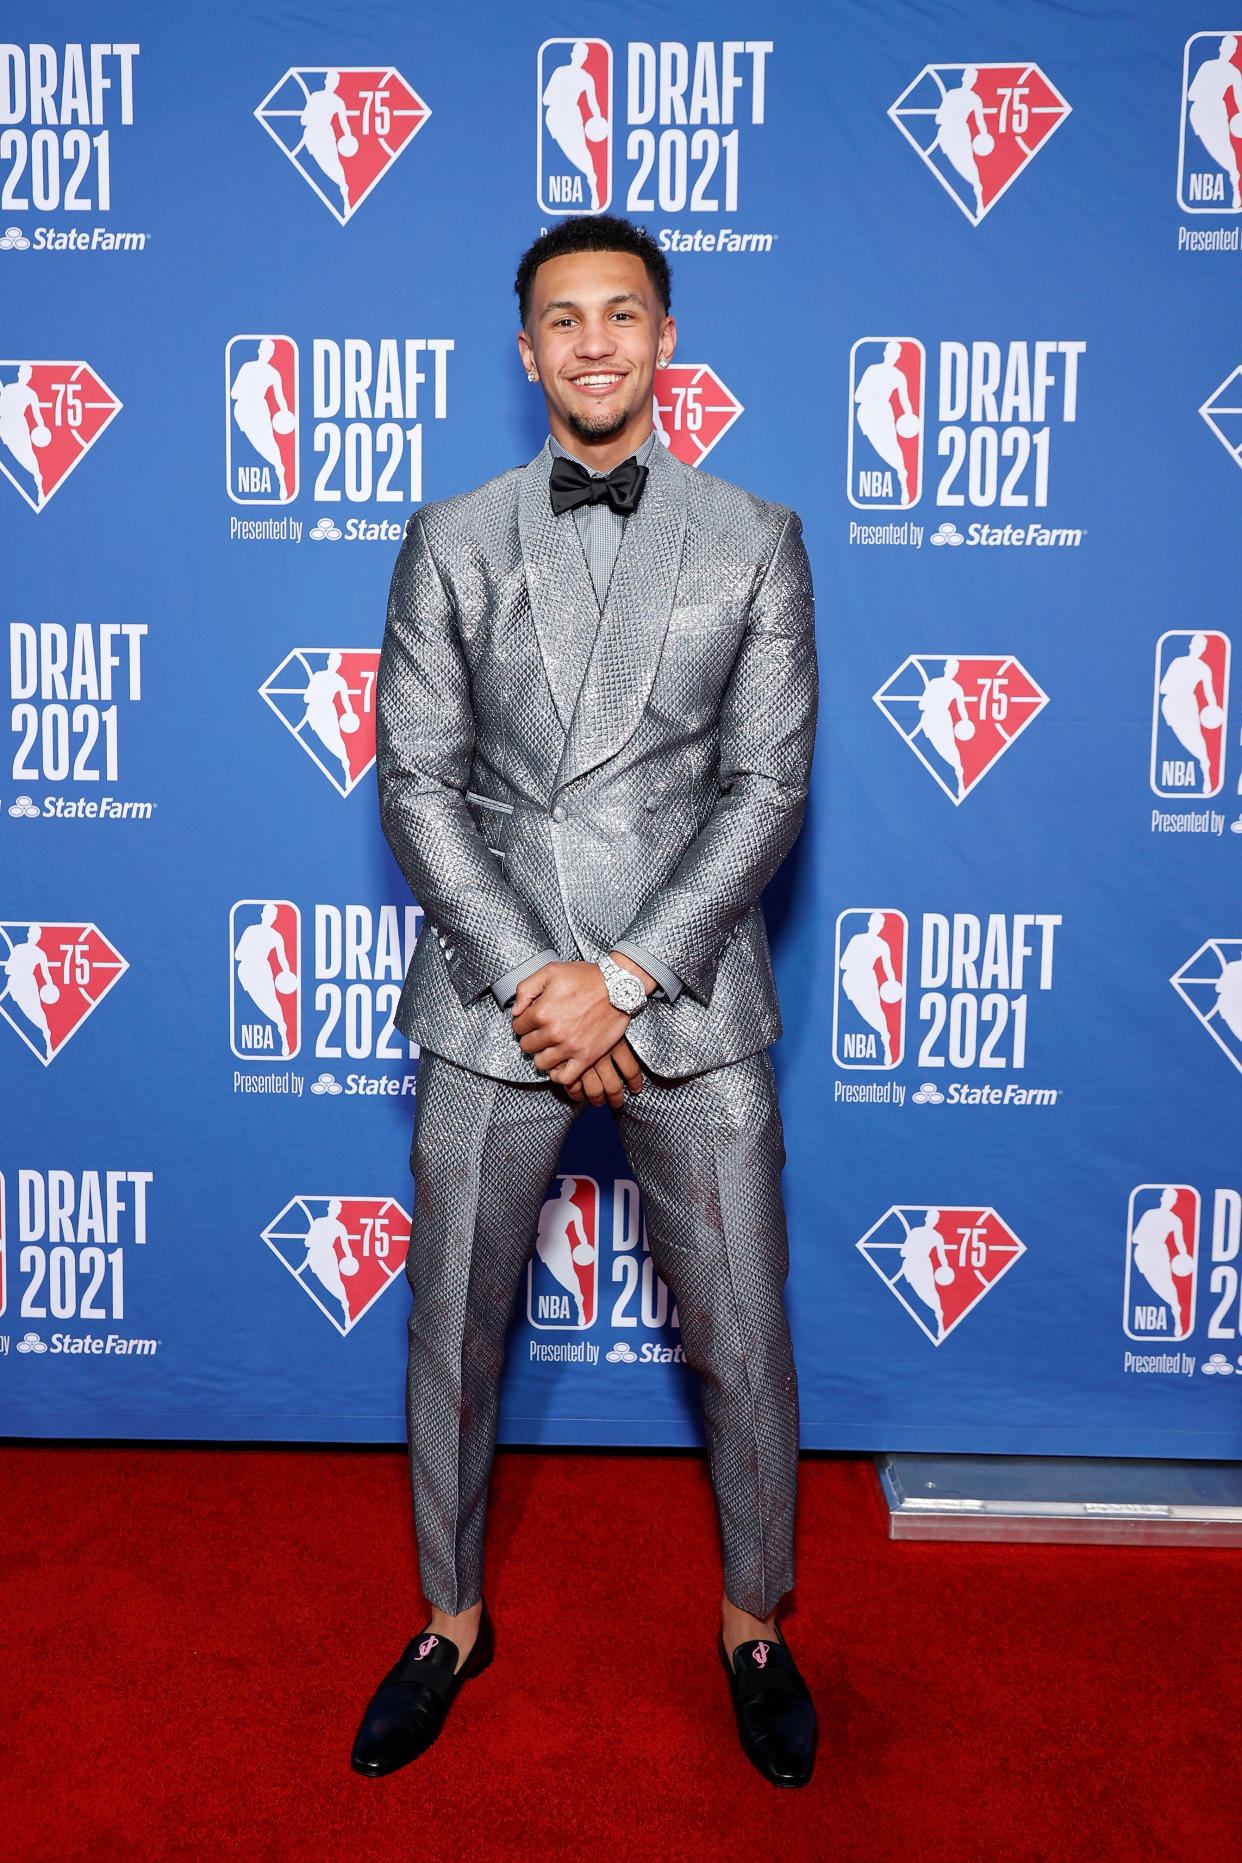 Jalen Suggs poses for photos on the red carpet during the 2021 NBA draft at the Barclays Center on July 29, 2021 in New York City. (Arturo Holmes/Getty Images)